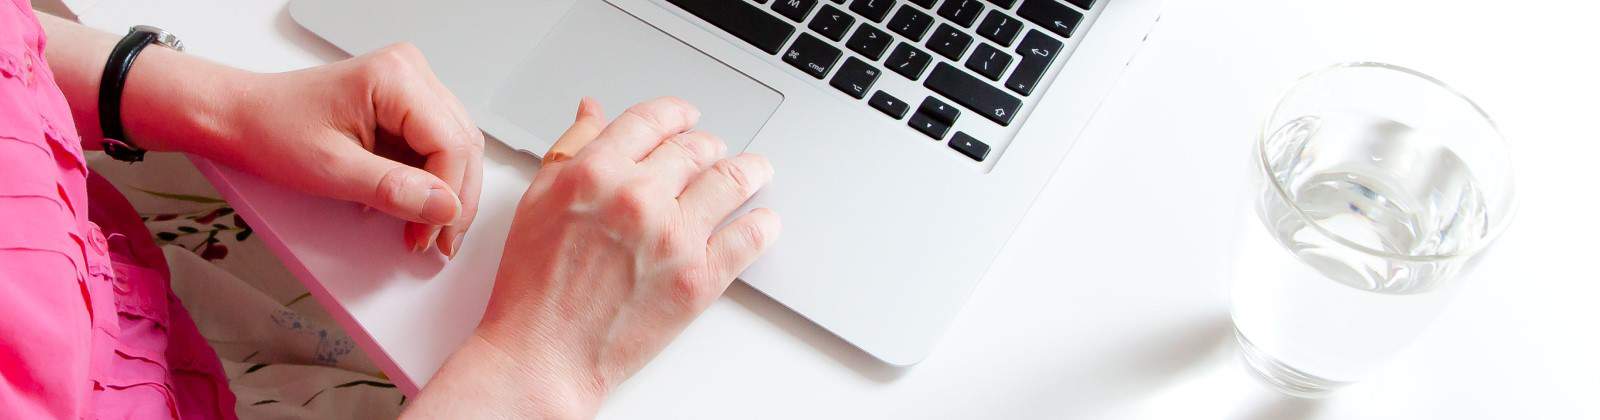 hands on the touchpad of a Macbook Air